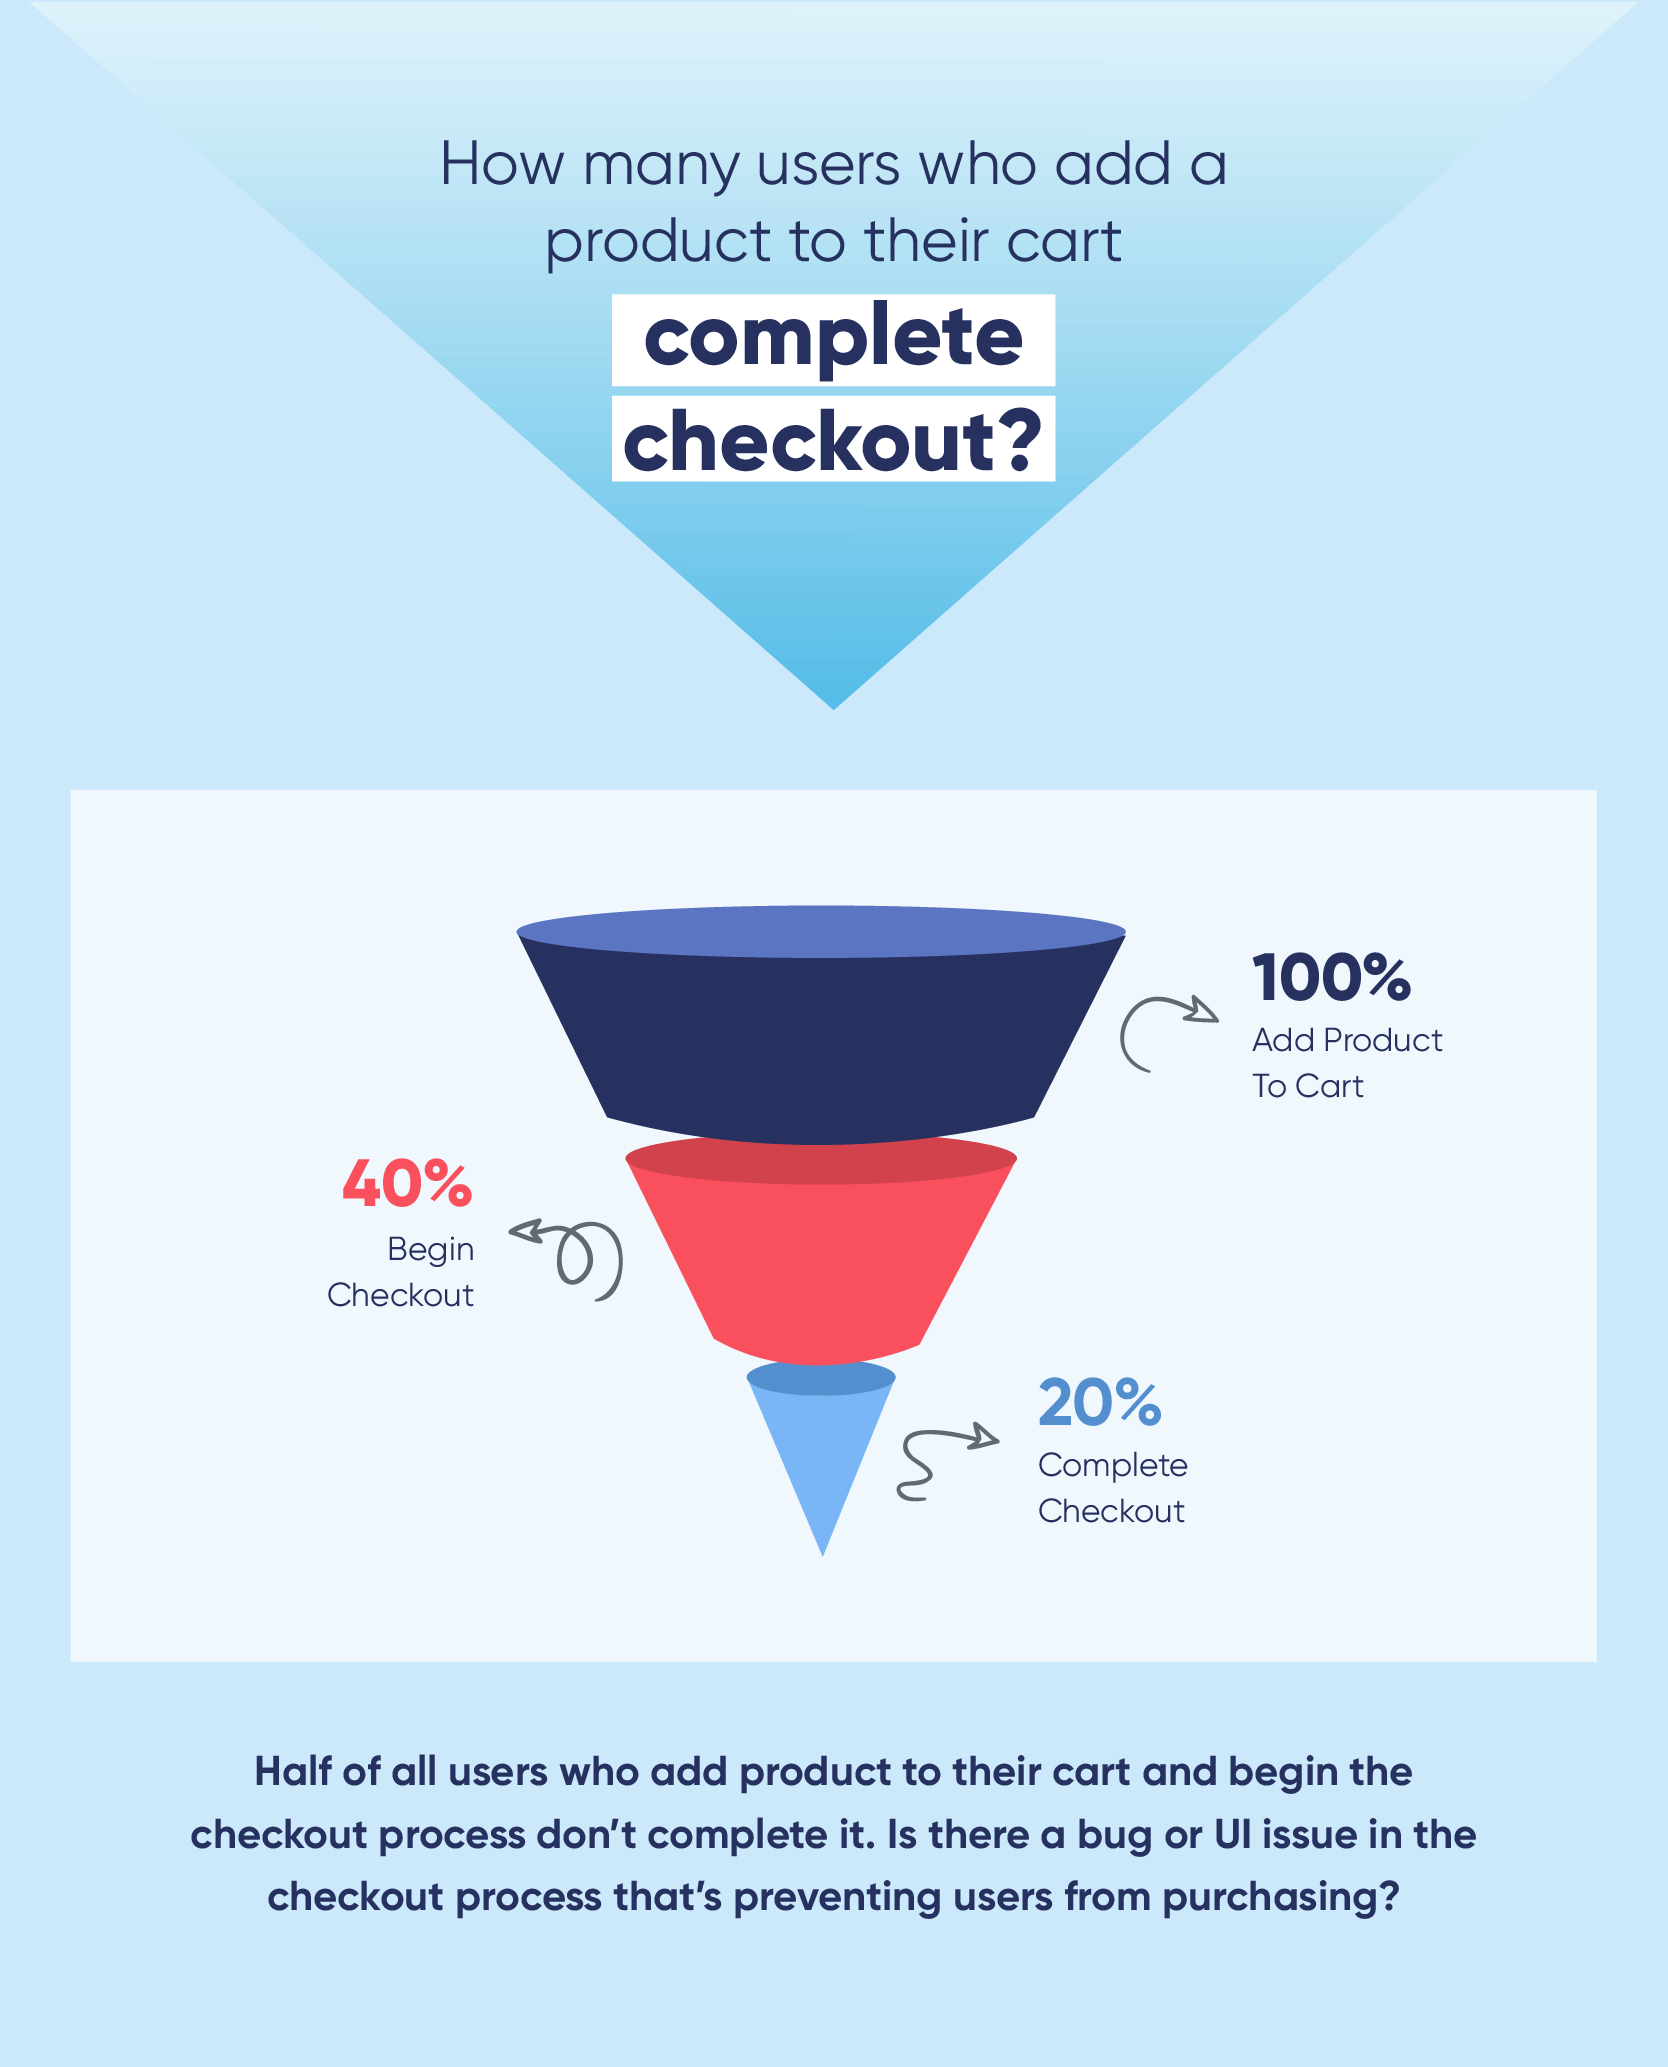 https://clevertap.com/wp-content/uploads/2021/01/Mobile-Checkout-Flow_Infographic.png